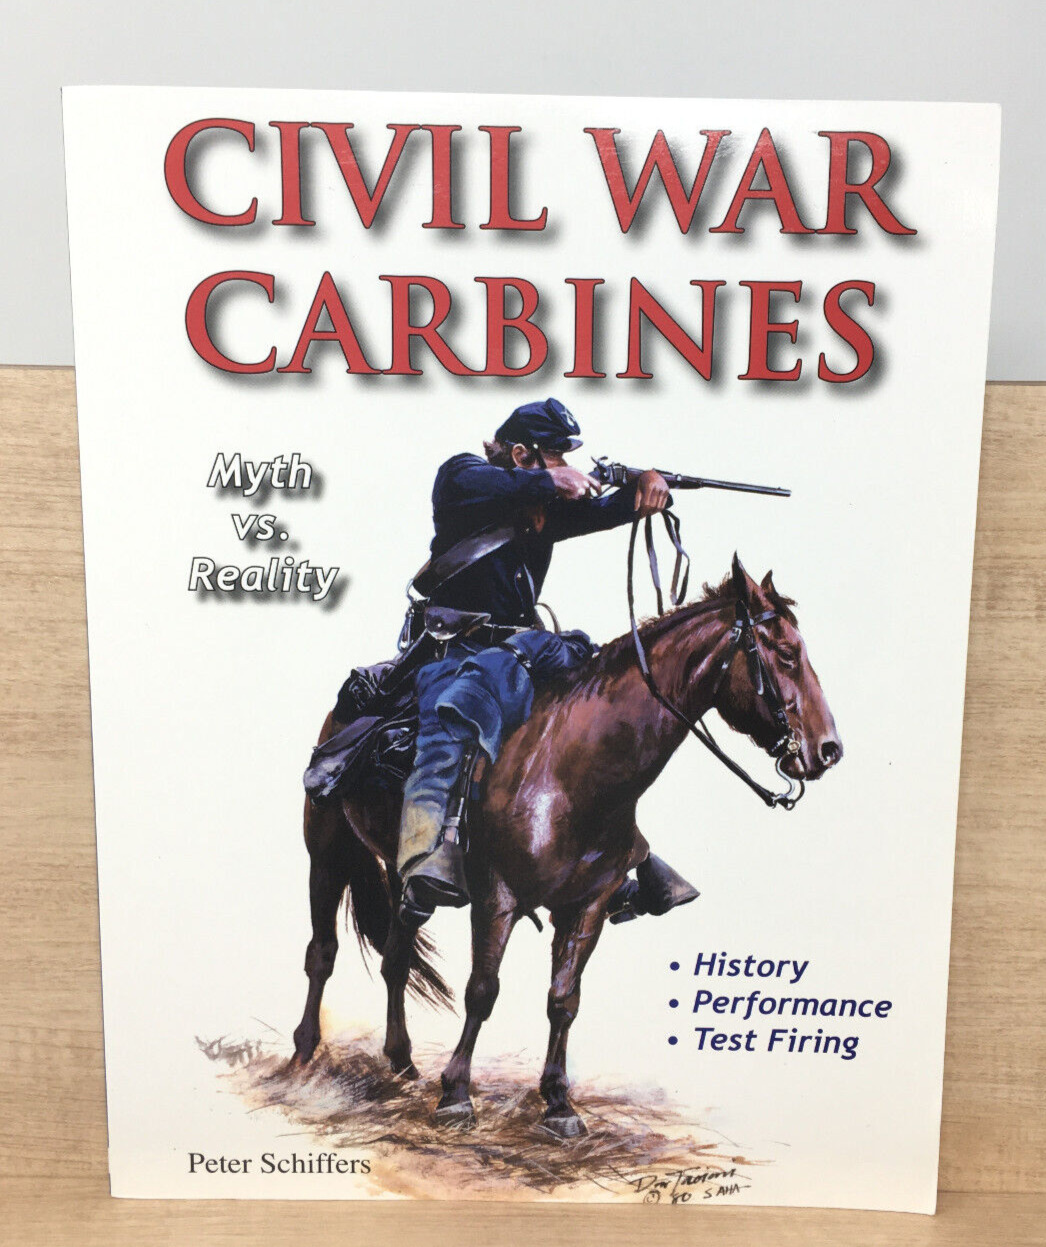 CIVIL WAR CARBINES Myth vs. Reality by Schiffers History/Performance/Test Firing